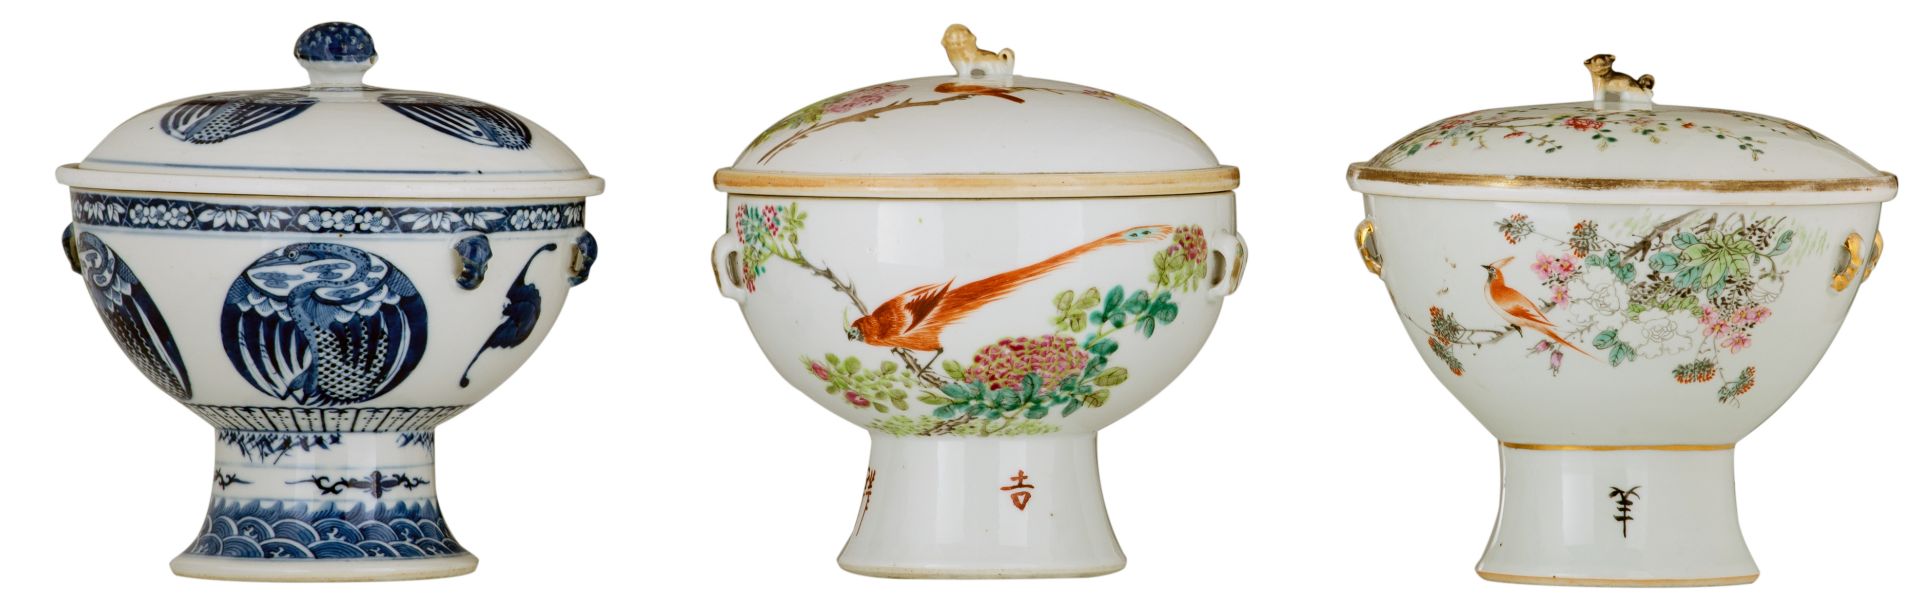 Two Chinese famille rose food containers, decorated with birds and flowers, one container with a sea